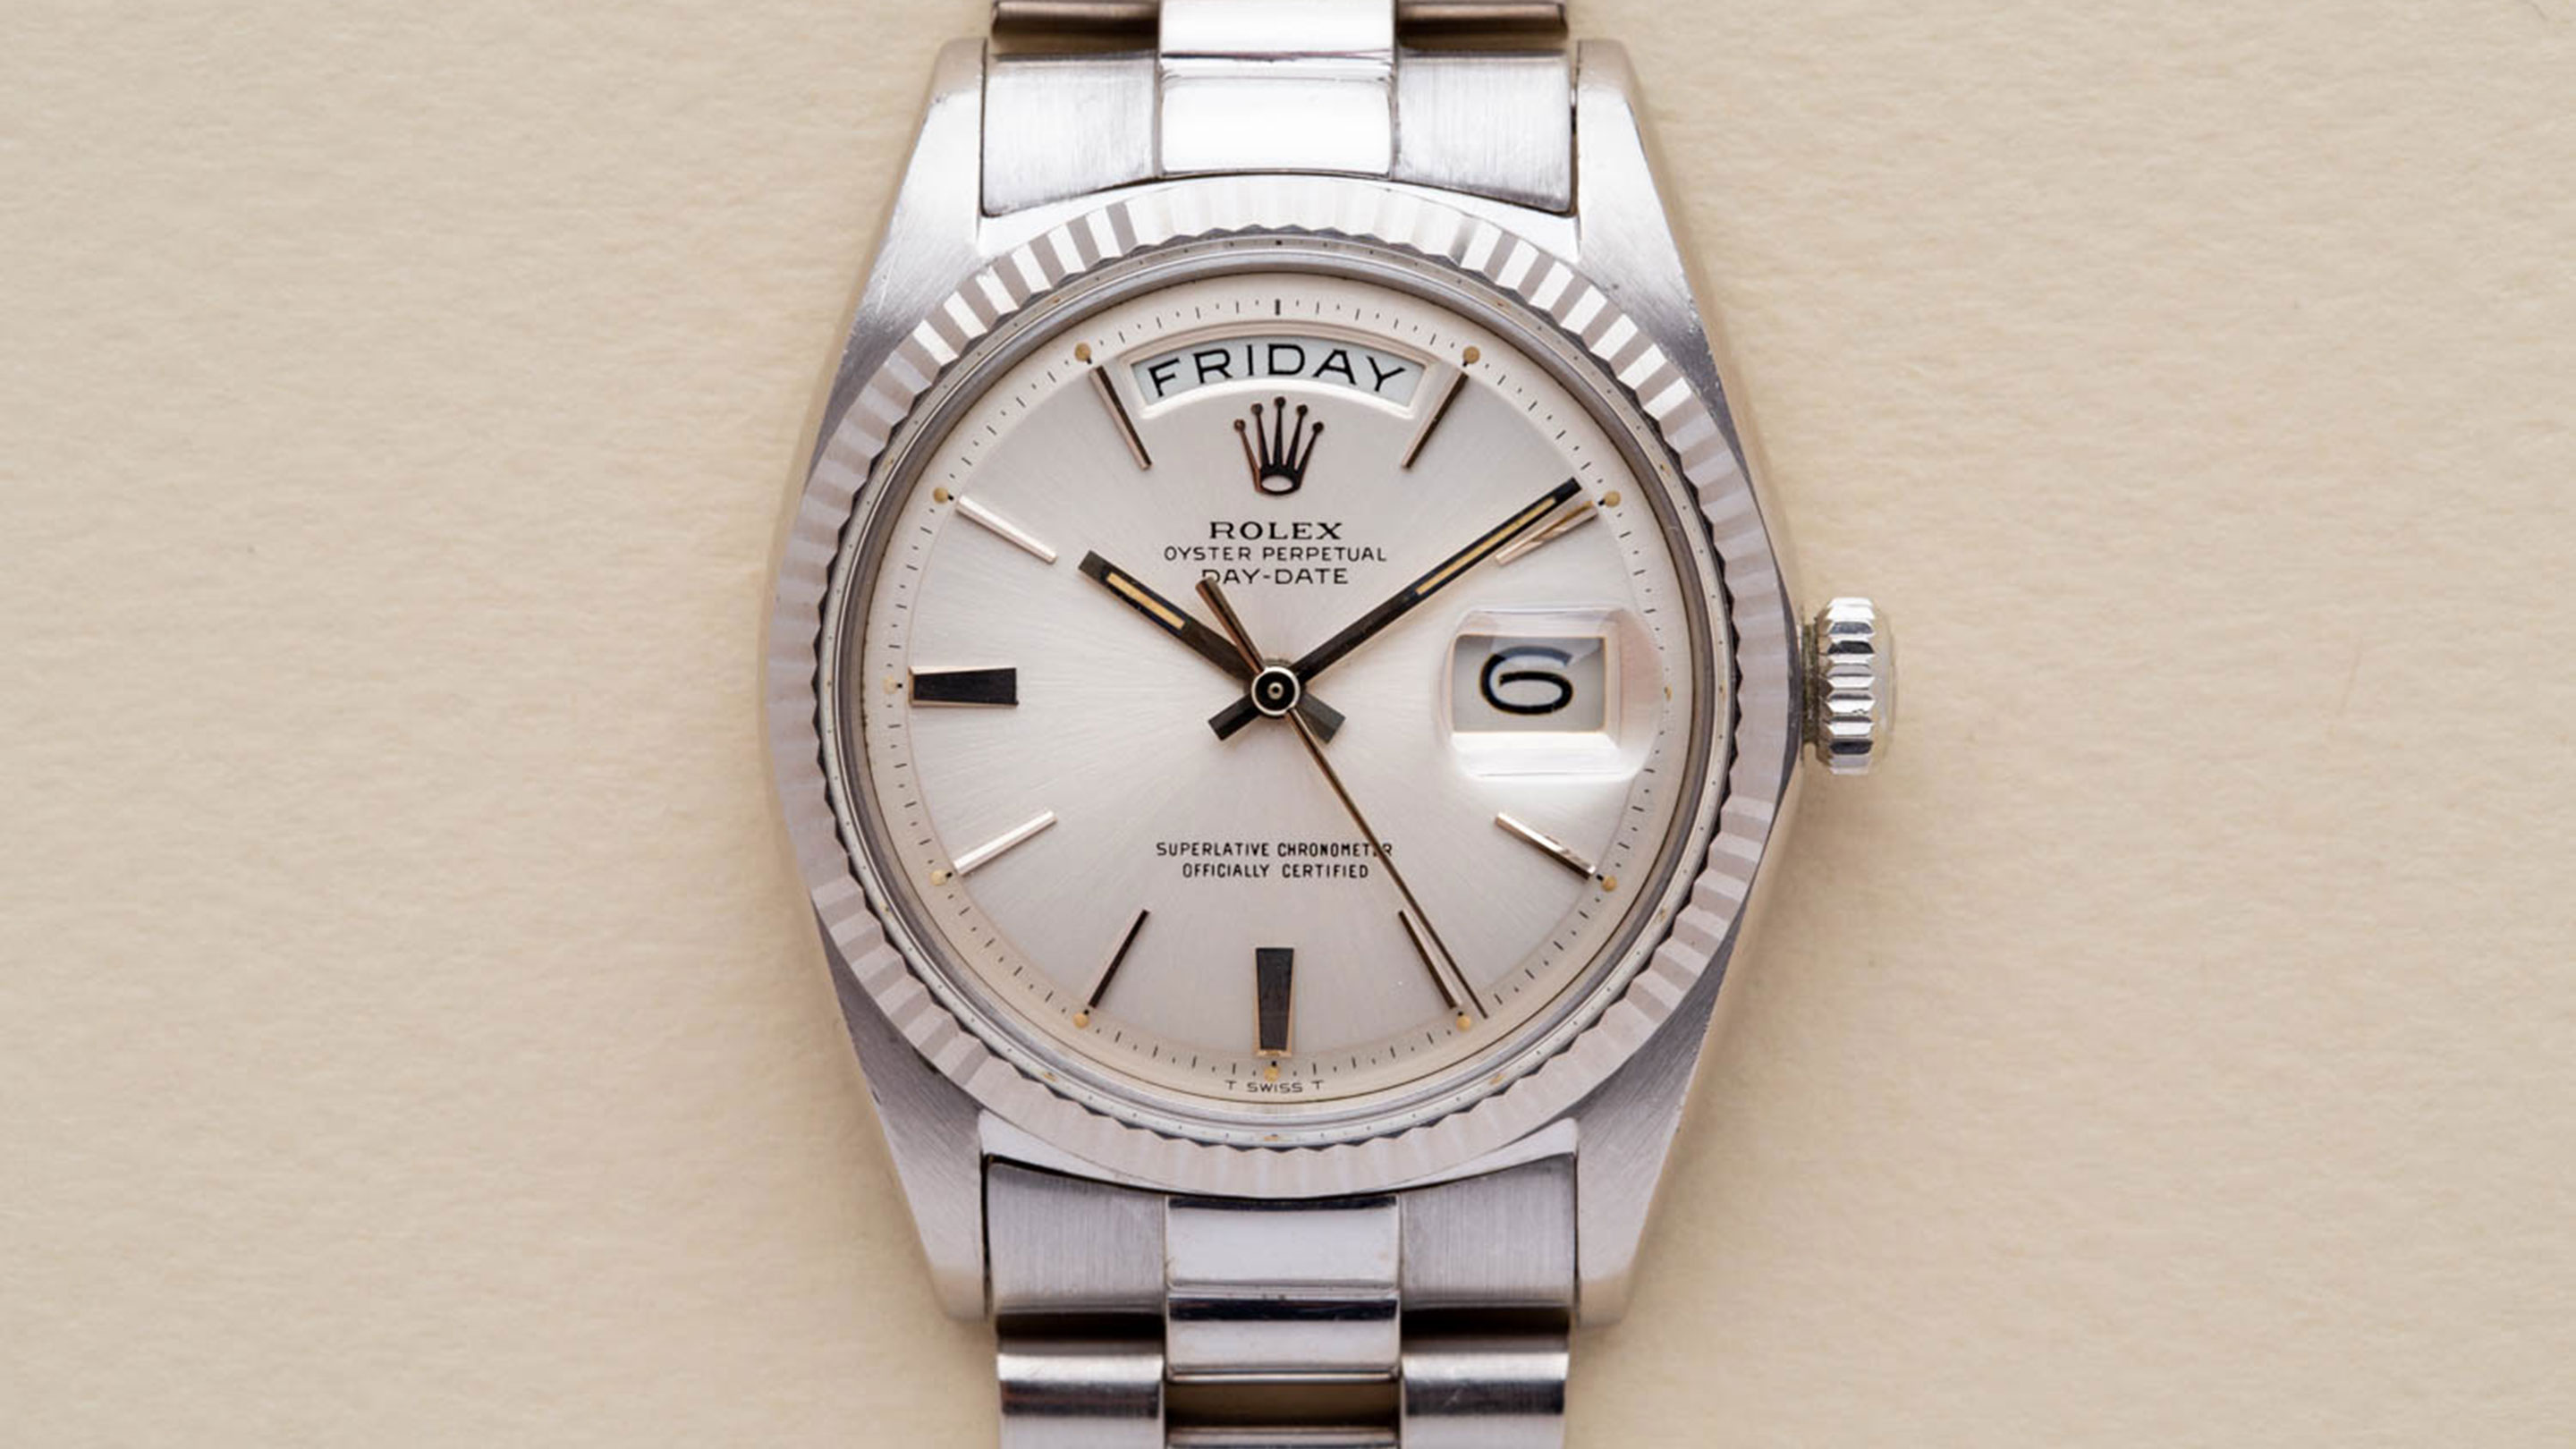 rolex oyster perpetual day date superlative chronometer officially certified t swiss made t